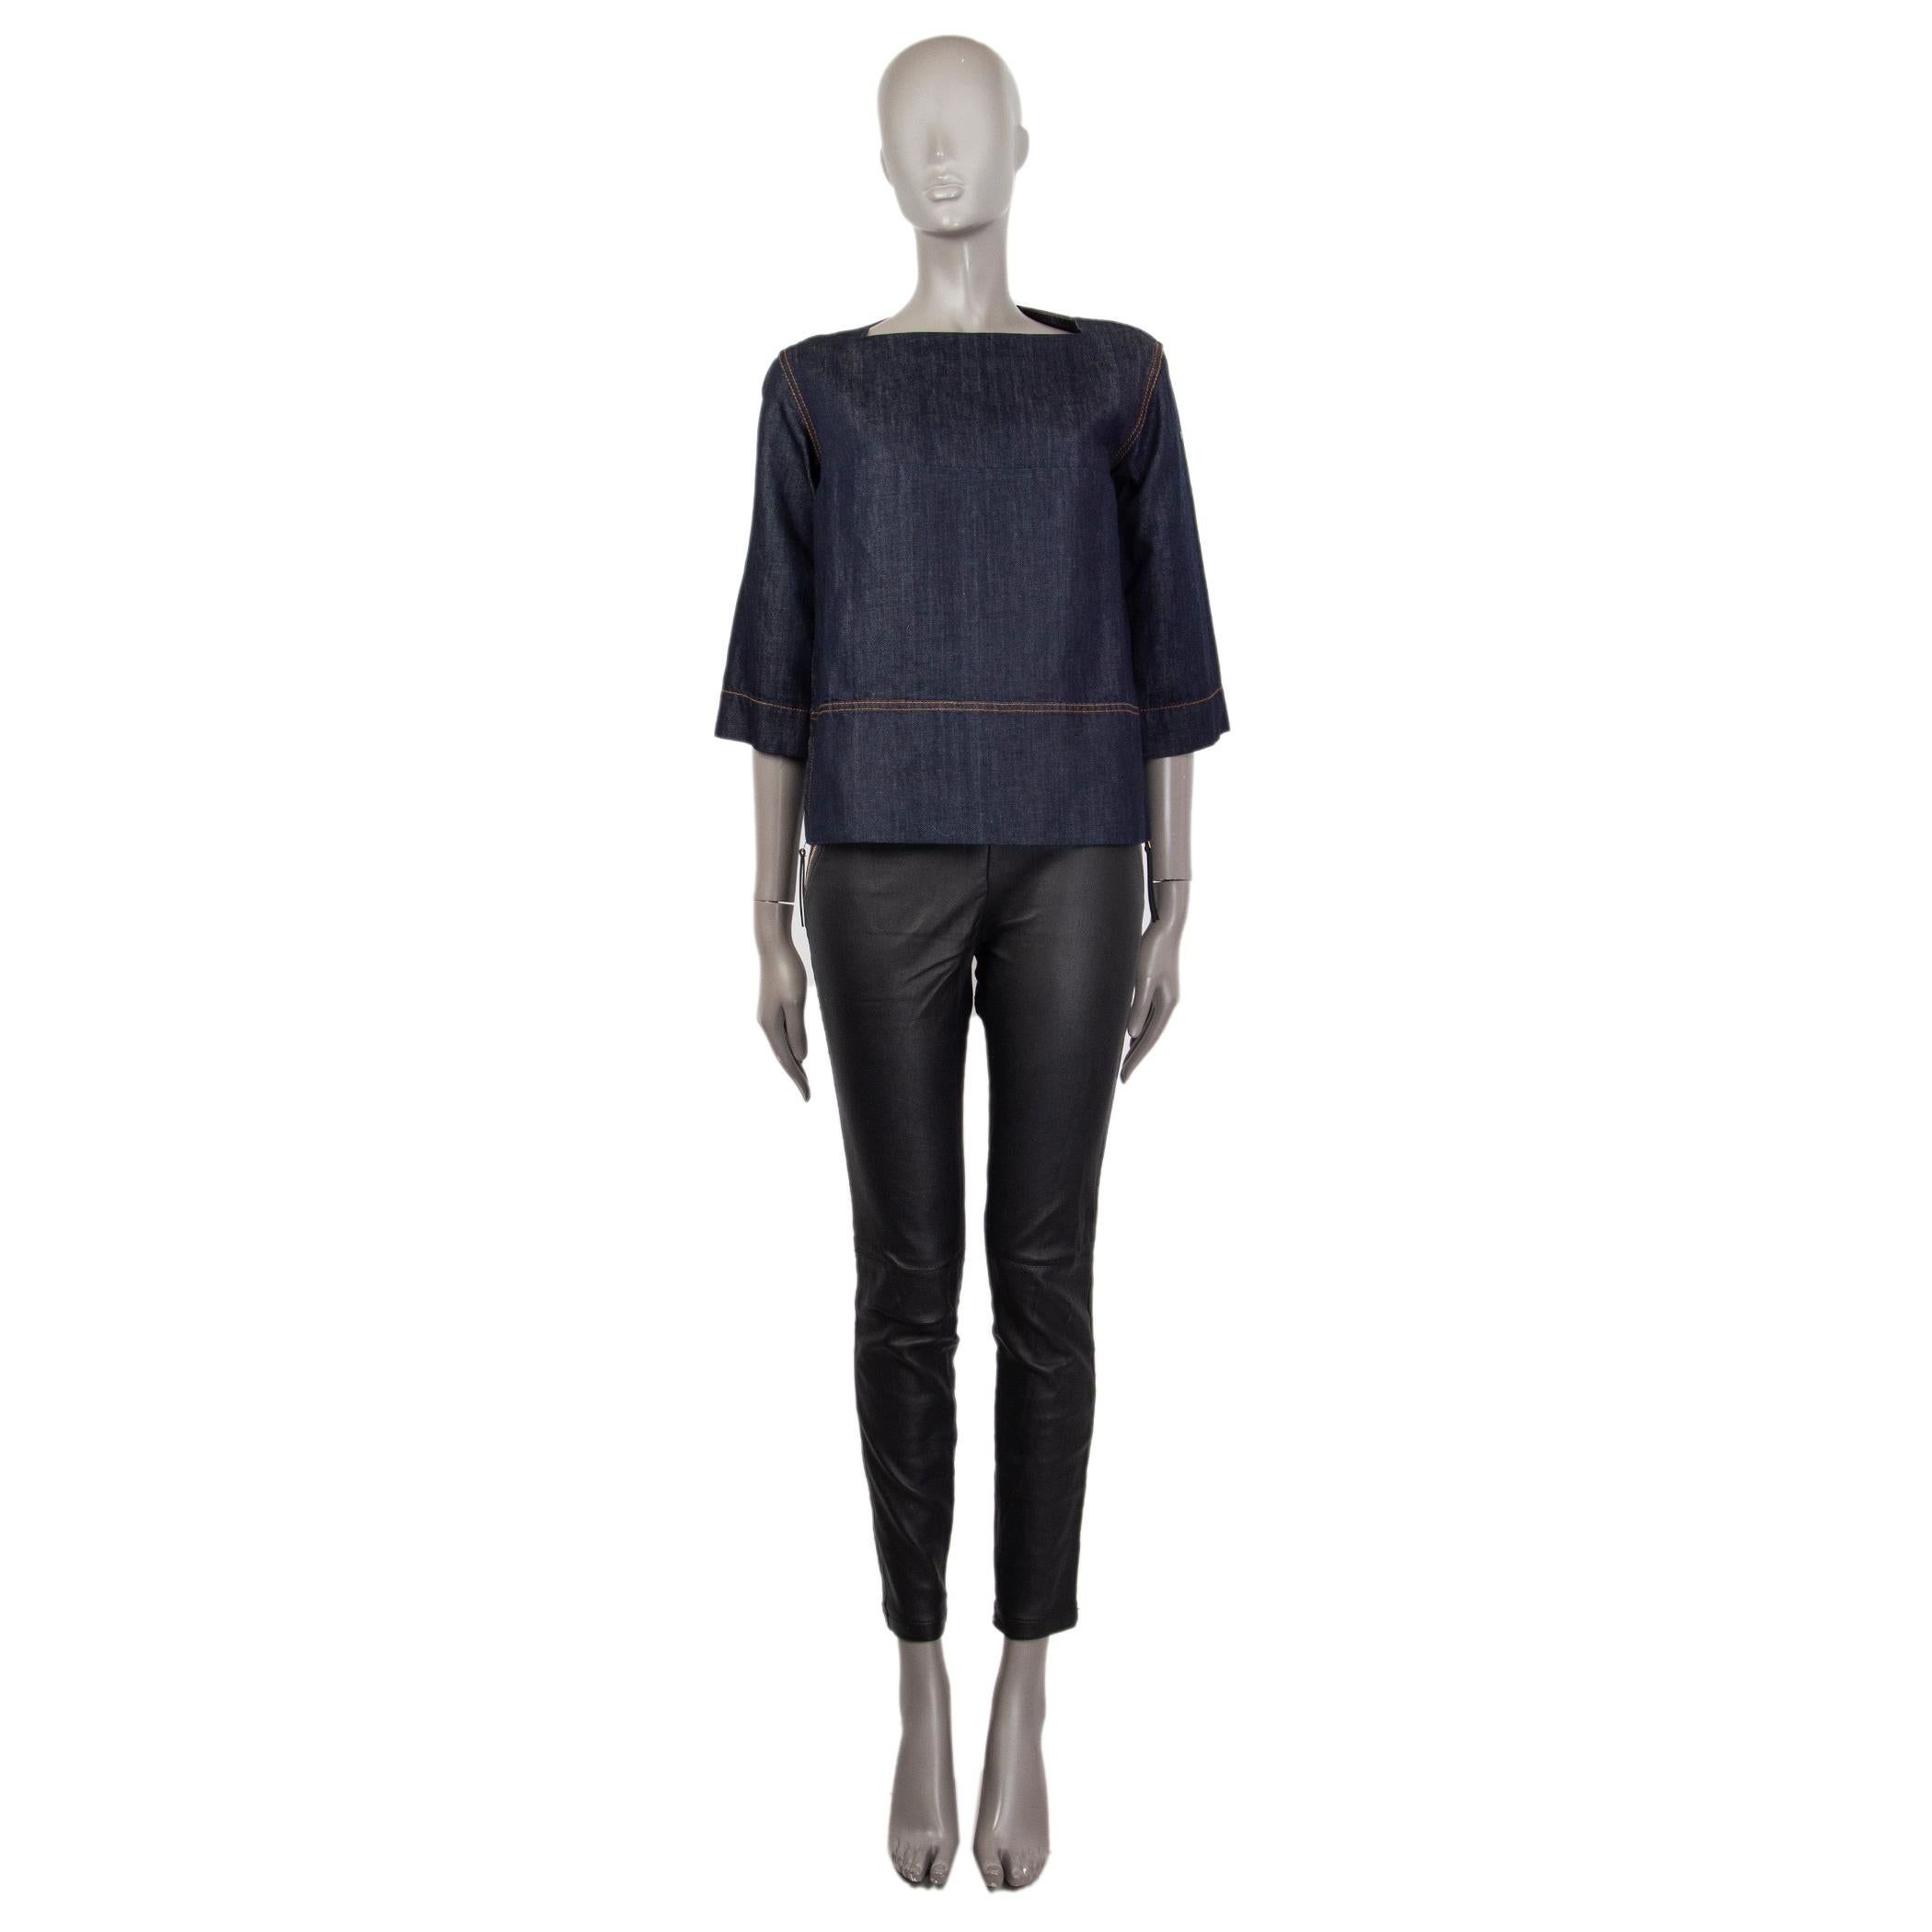 100% authentic Marni 3/4-sleeve denim blouse in indigo cotton (70%) and linen (30%) with a squared-neck. Has slits on the sides that close with gold-toned zippers. Unlined. Has been worn and is in excellent condition. 

Measurements
Tag